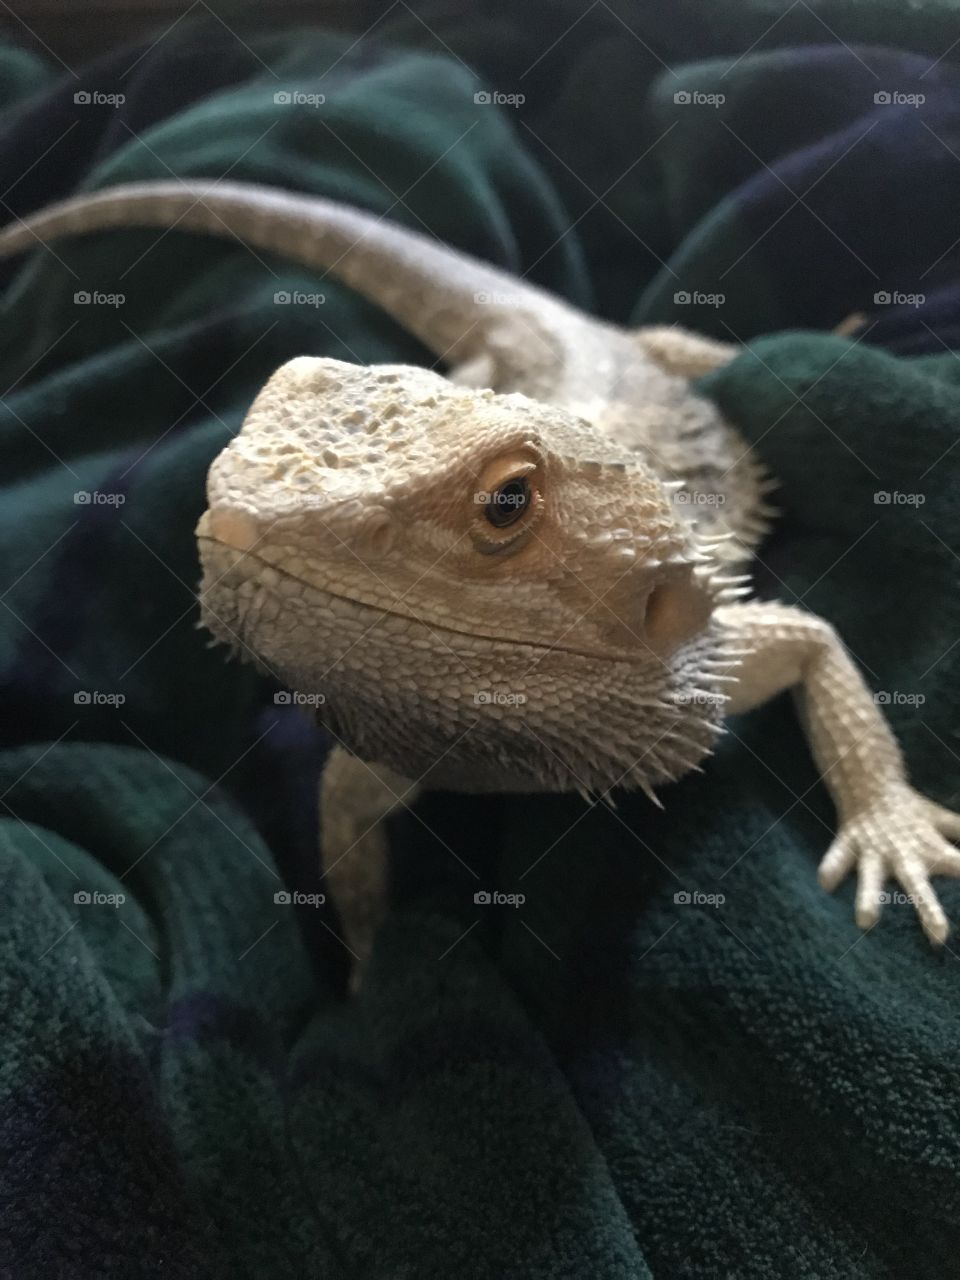 Stormy my Bearded Dragon needs some love and attention so he’s cuddled up on my lap. The pups are under the blanket keeping my lap warm enough for the prickly guy. ❤️